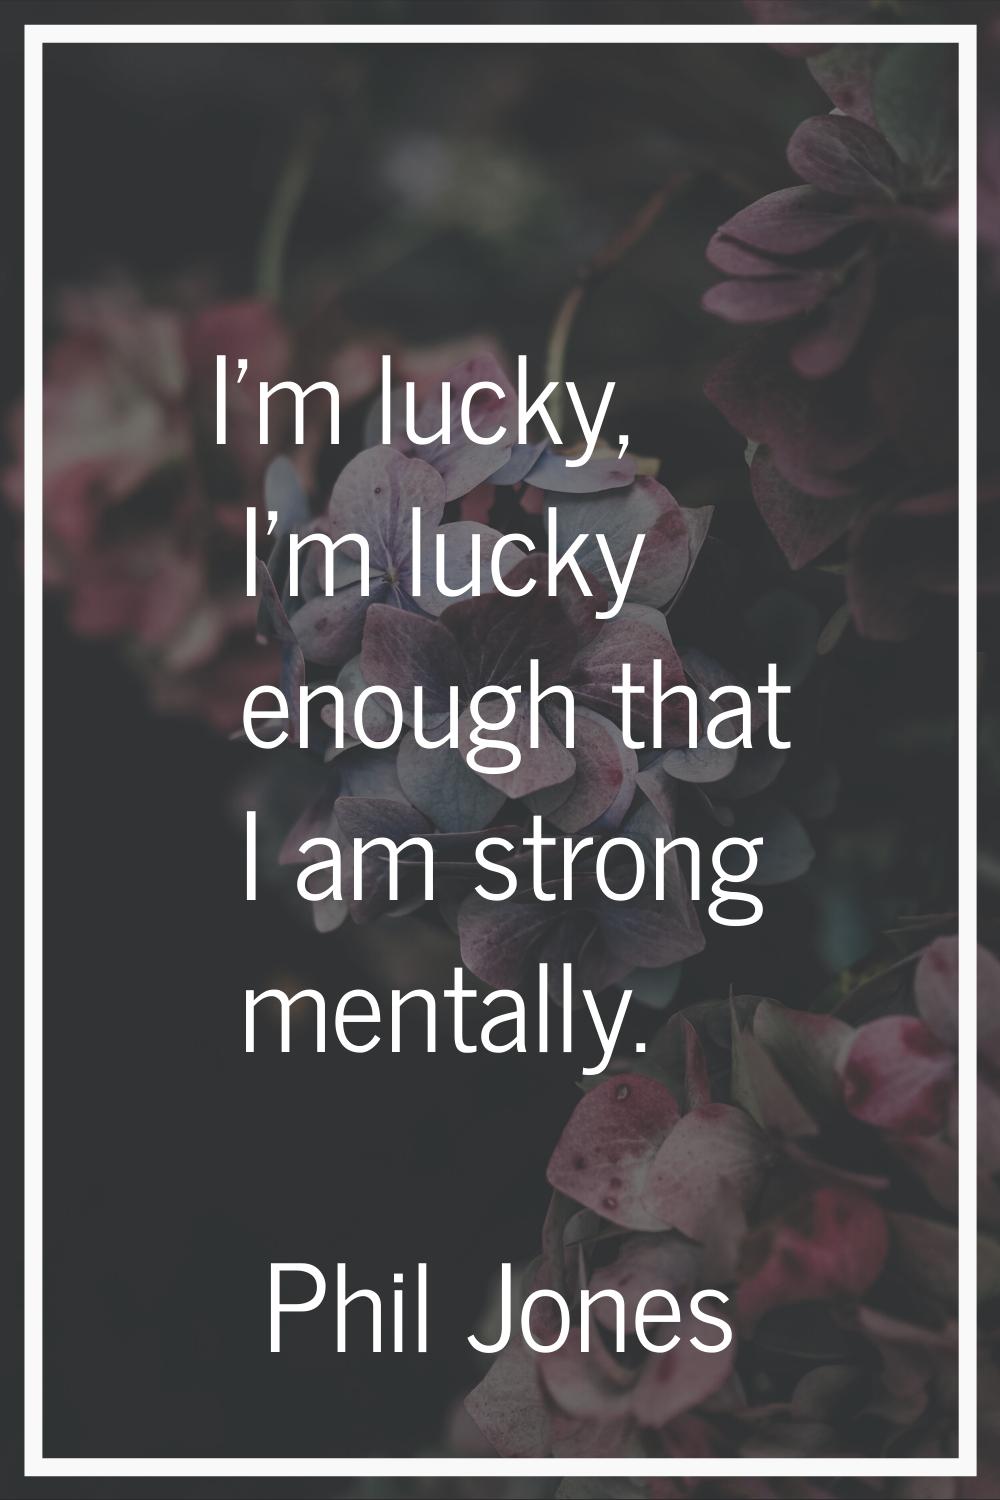 I'm lucky, I'm lucky enough that I am strong mentally.